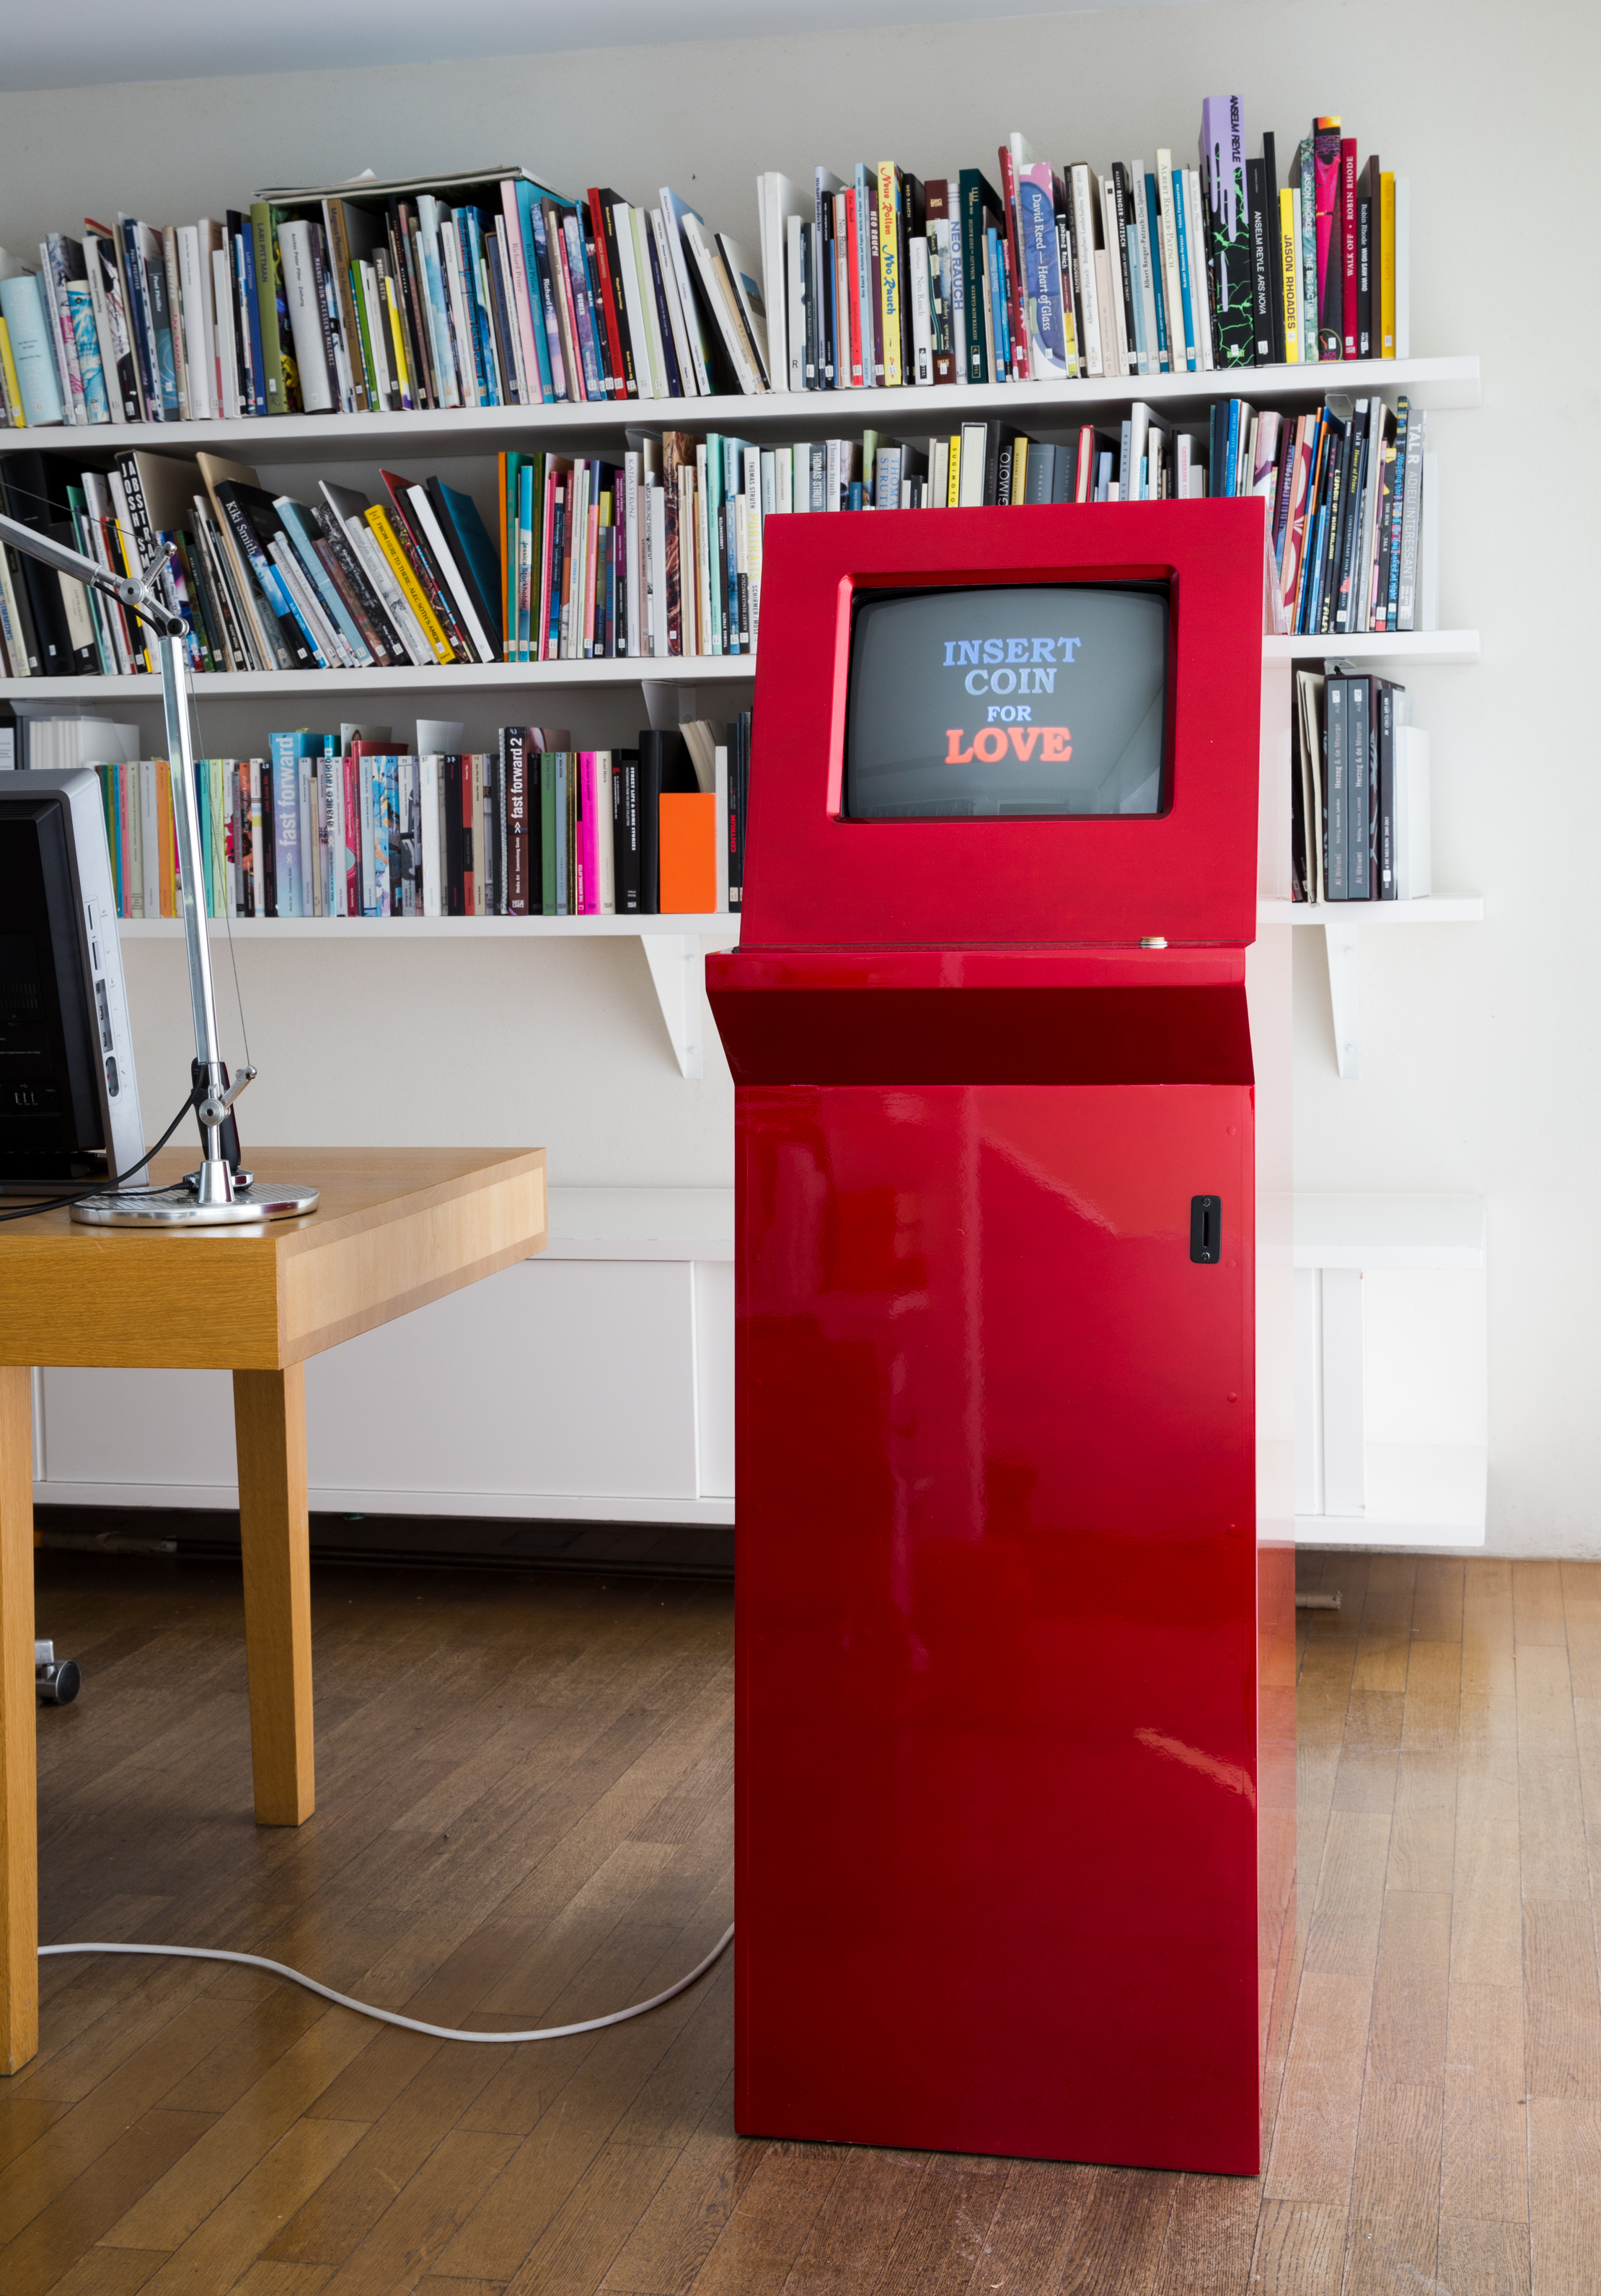 A red coin-operated machine with a monitor stands in front of a bookshelf